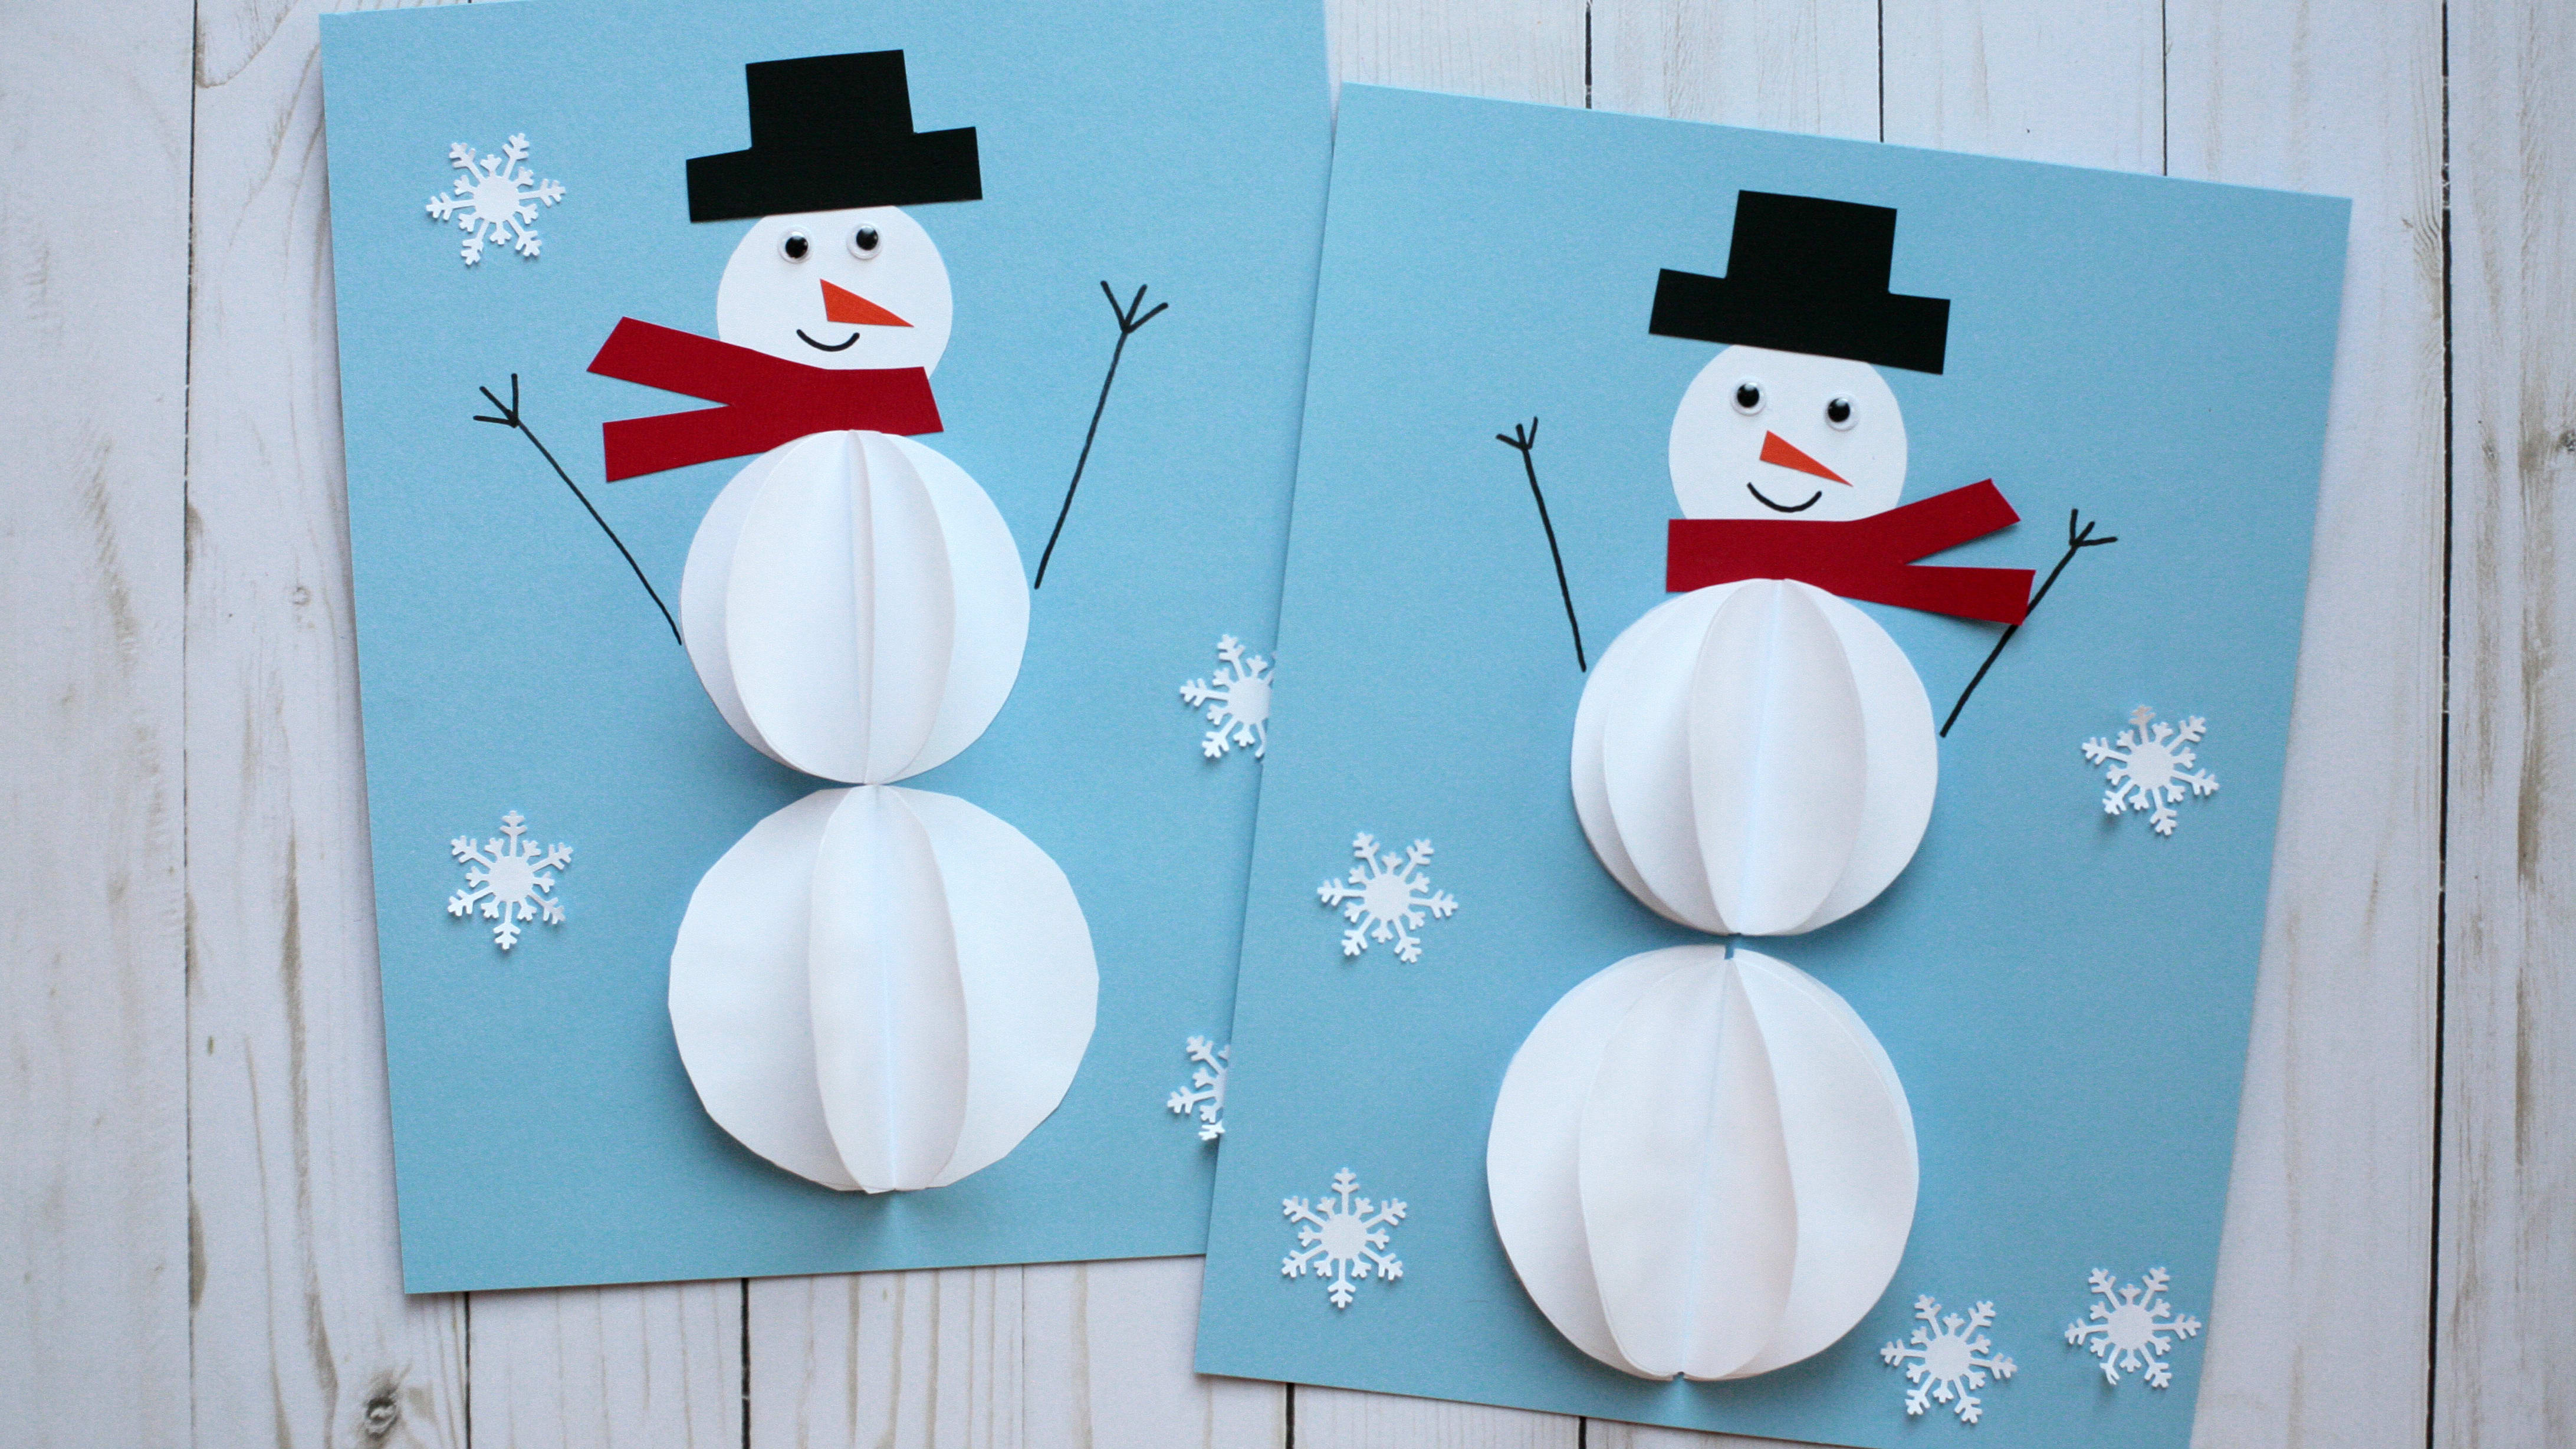 Do You Want to Build a Snowman? Three Fun {Indoor} Snowman